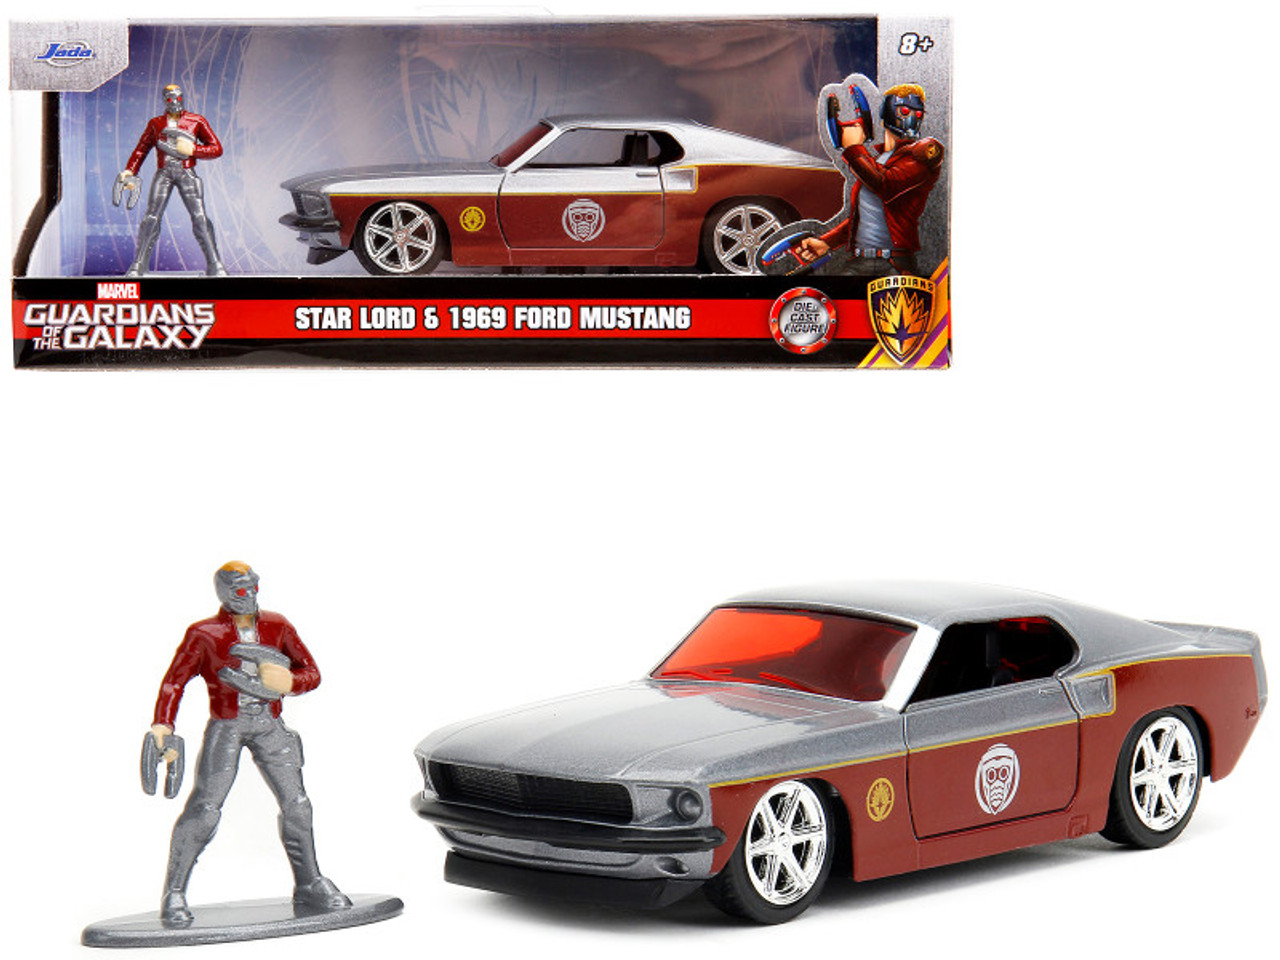 1969 Ford Mustang Silver Metallic and Dark Red and Star Lord Diecast Figure "Marvel Guardians of the Galaxy" "Hollywood Rides" Series 1/32 Diecast Model Car by Jada